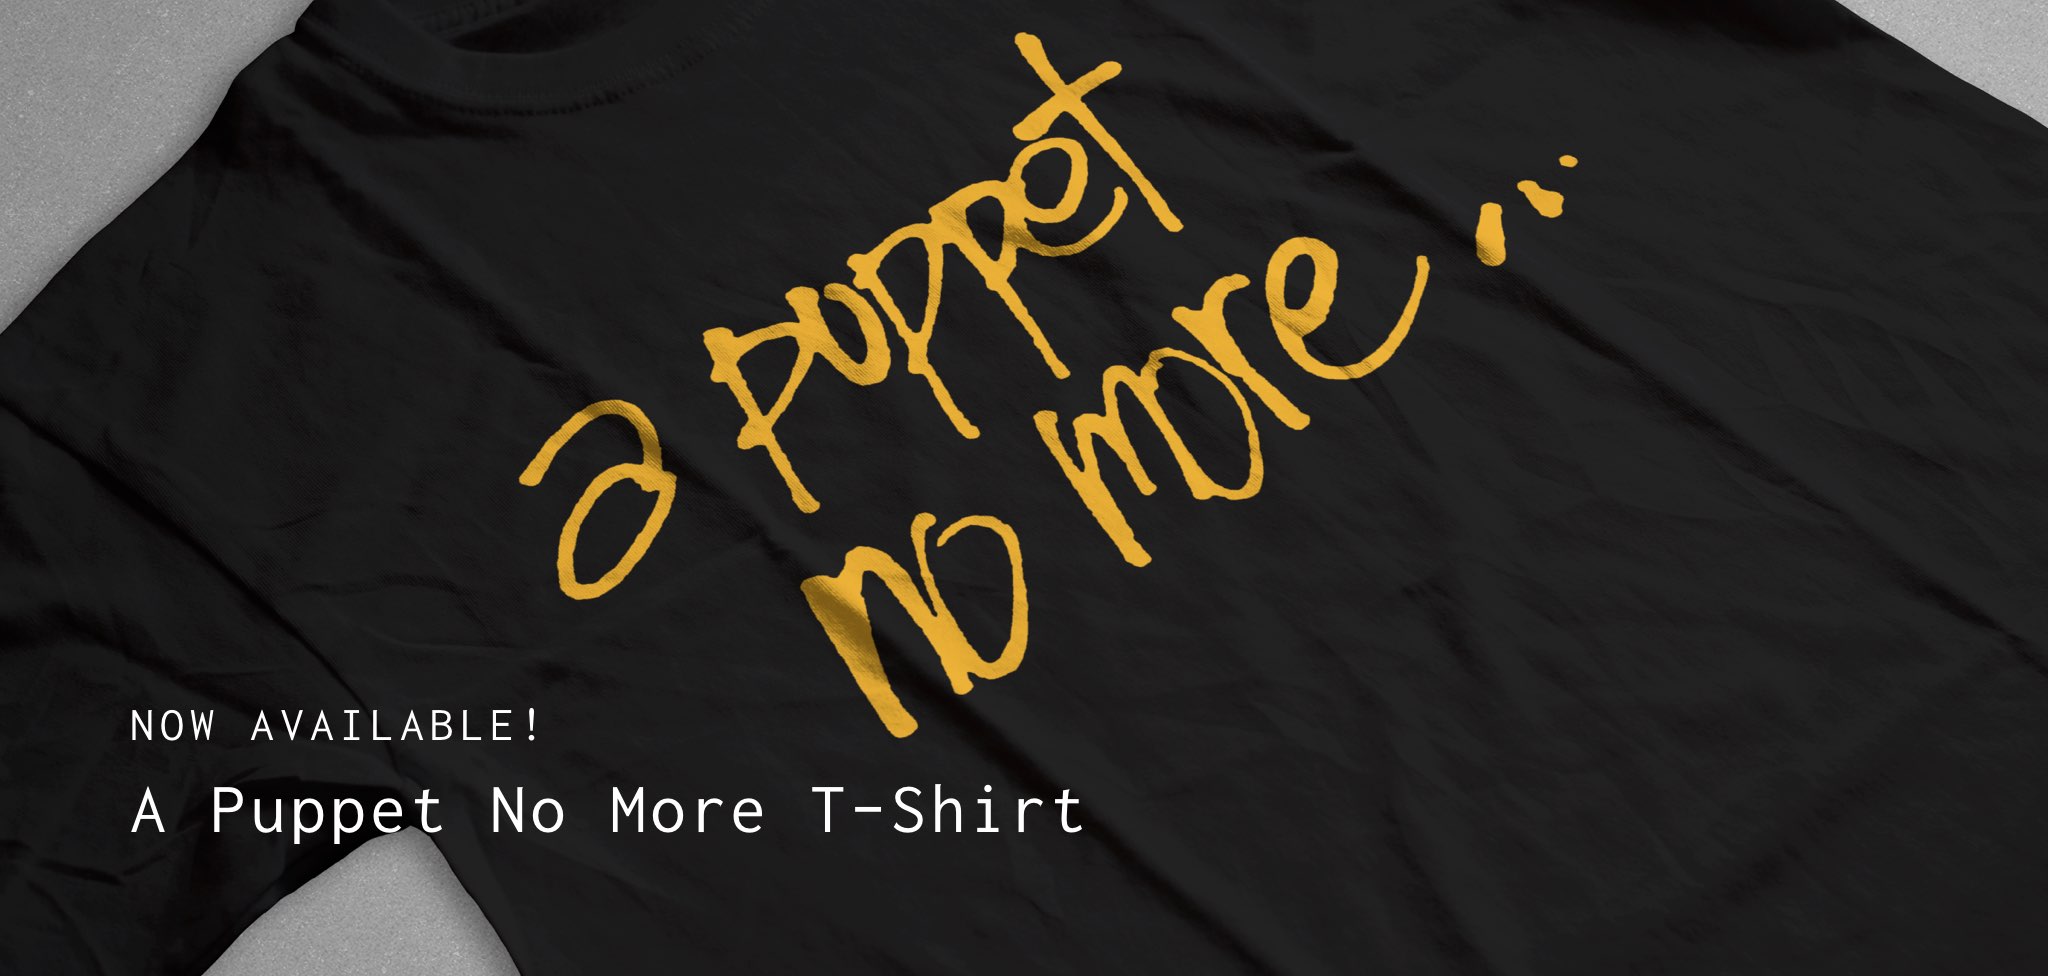 Now Available - A Puppet No More T-Shirt